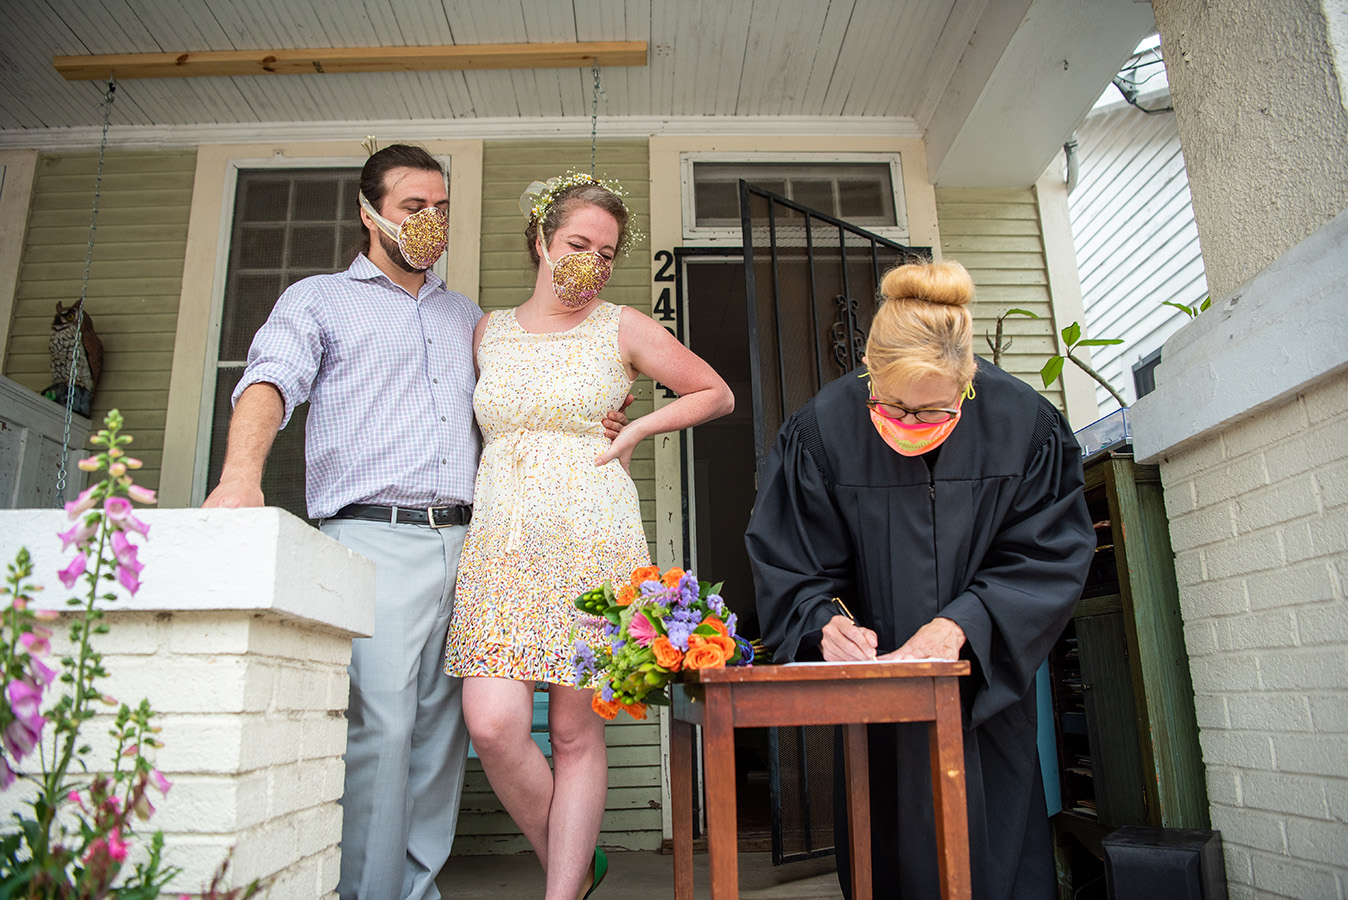 Elizabeth's biological mother dropped off a wedding present for the couple on their porch prior to the wedding: "two fully functional n-95 masks covered in glitter, courtesy of my step-dad, that proceeded to shed glitter everywhere like magic pixie dust through the entire ceremony," shares Elizabeth.